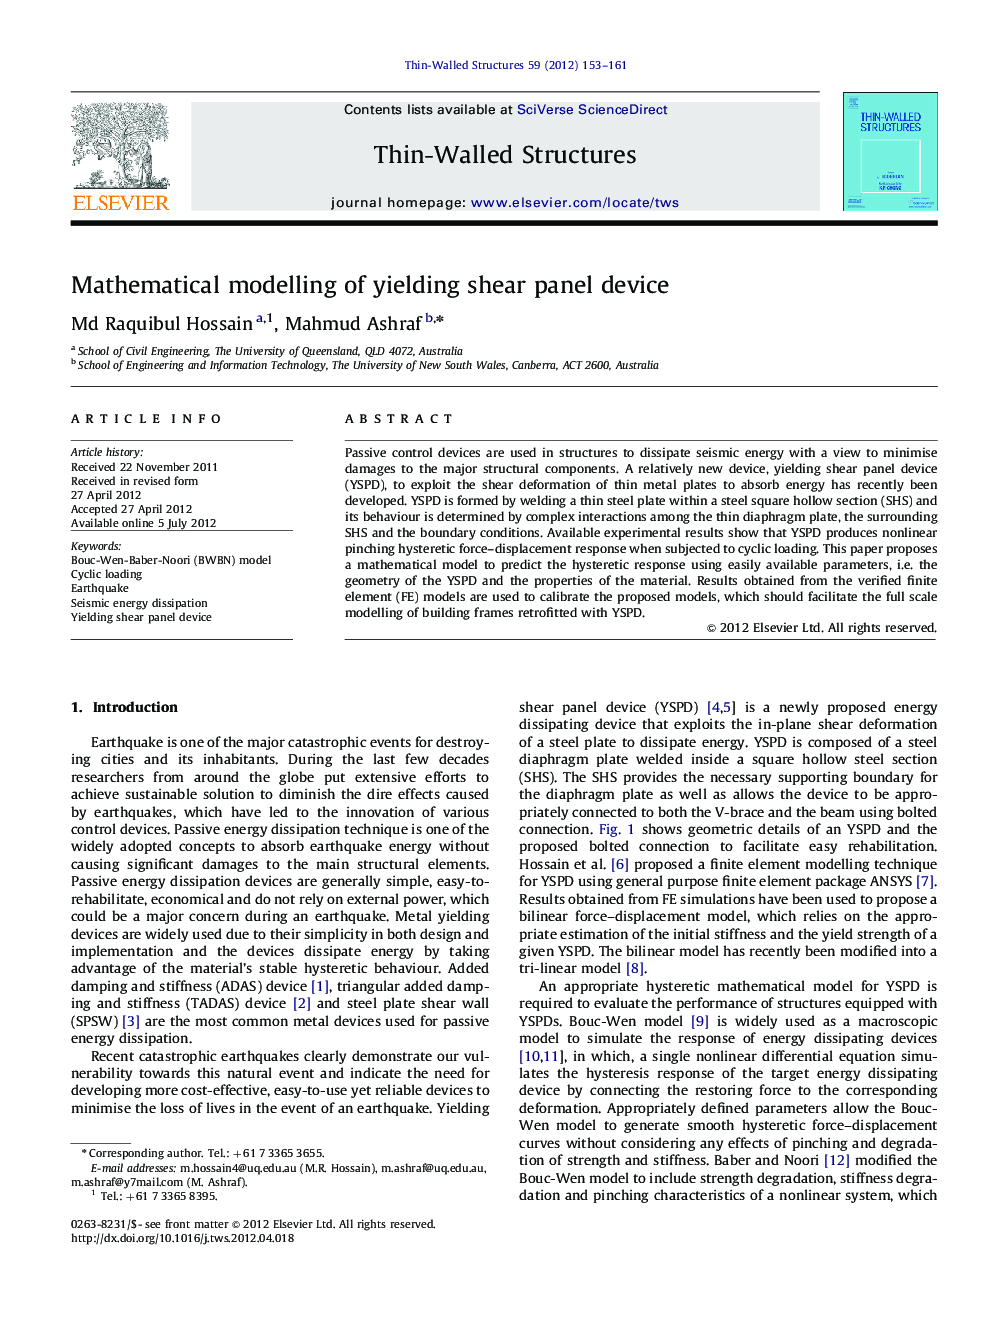 Mathematical modelling of yielding shear panel device